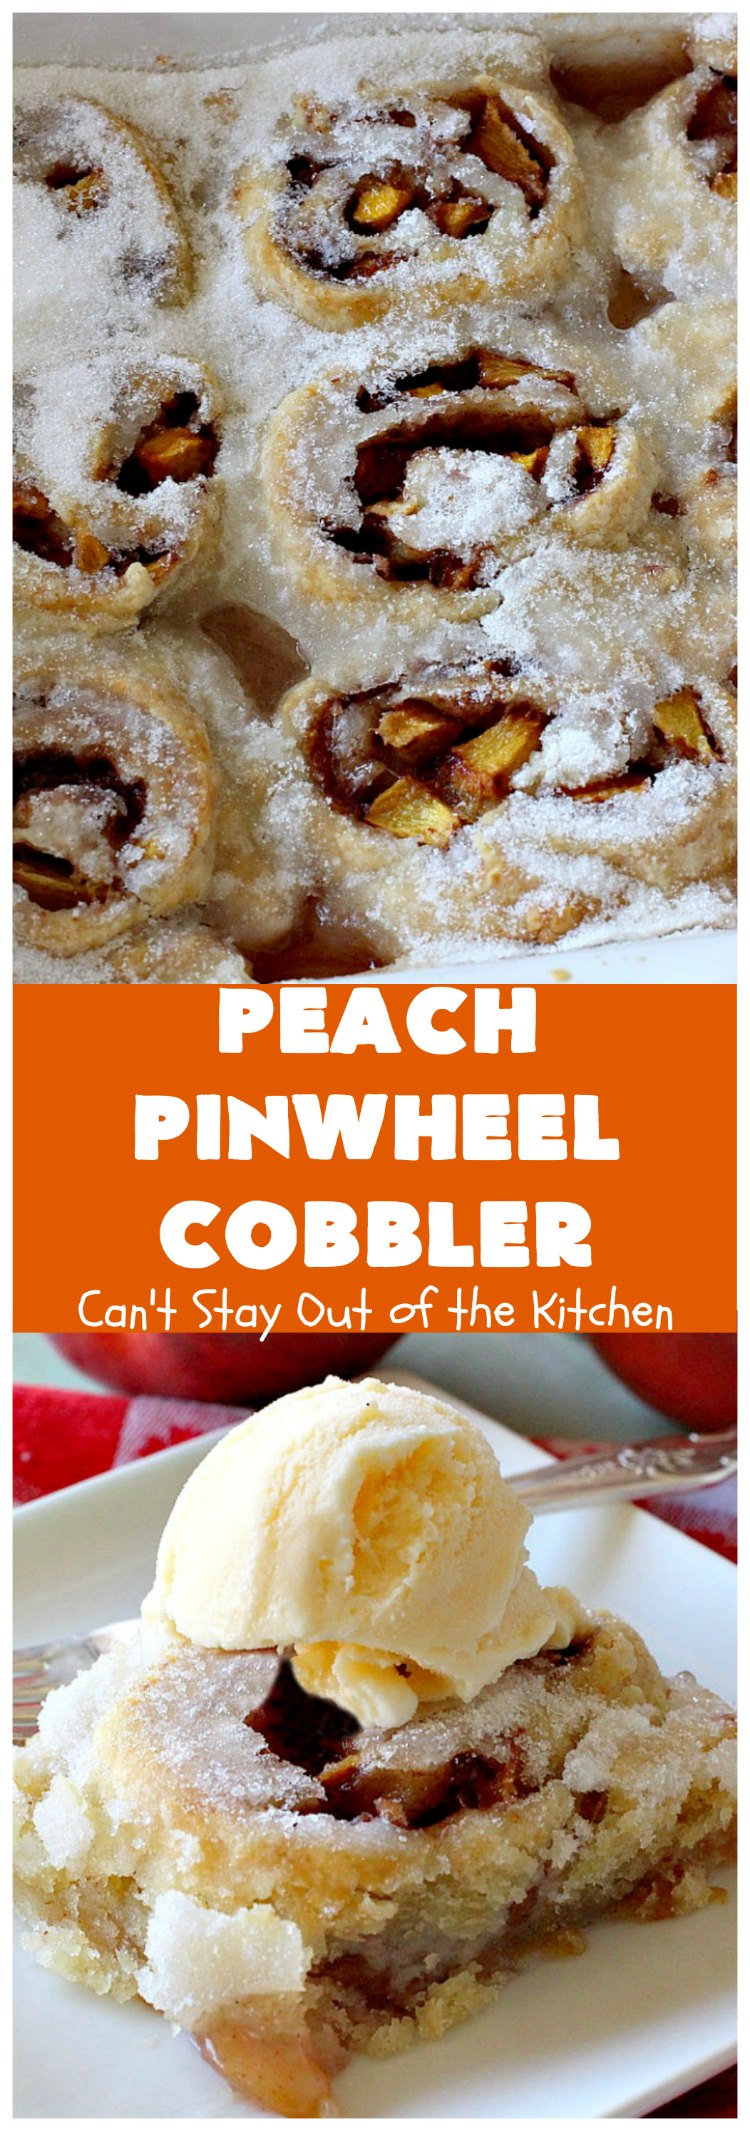 Peach Pinwheel Cobbler | Can't Stay Out of the Kitchen